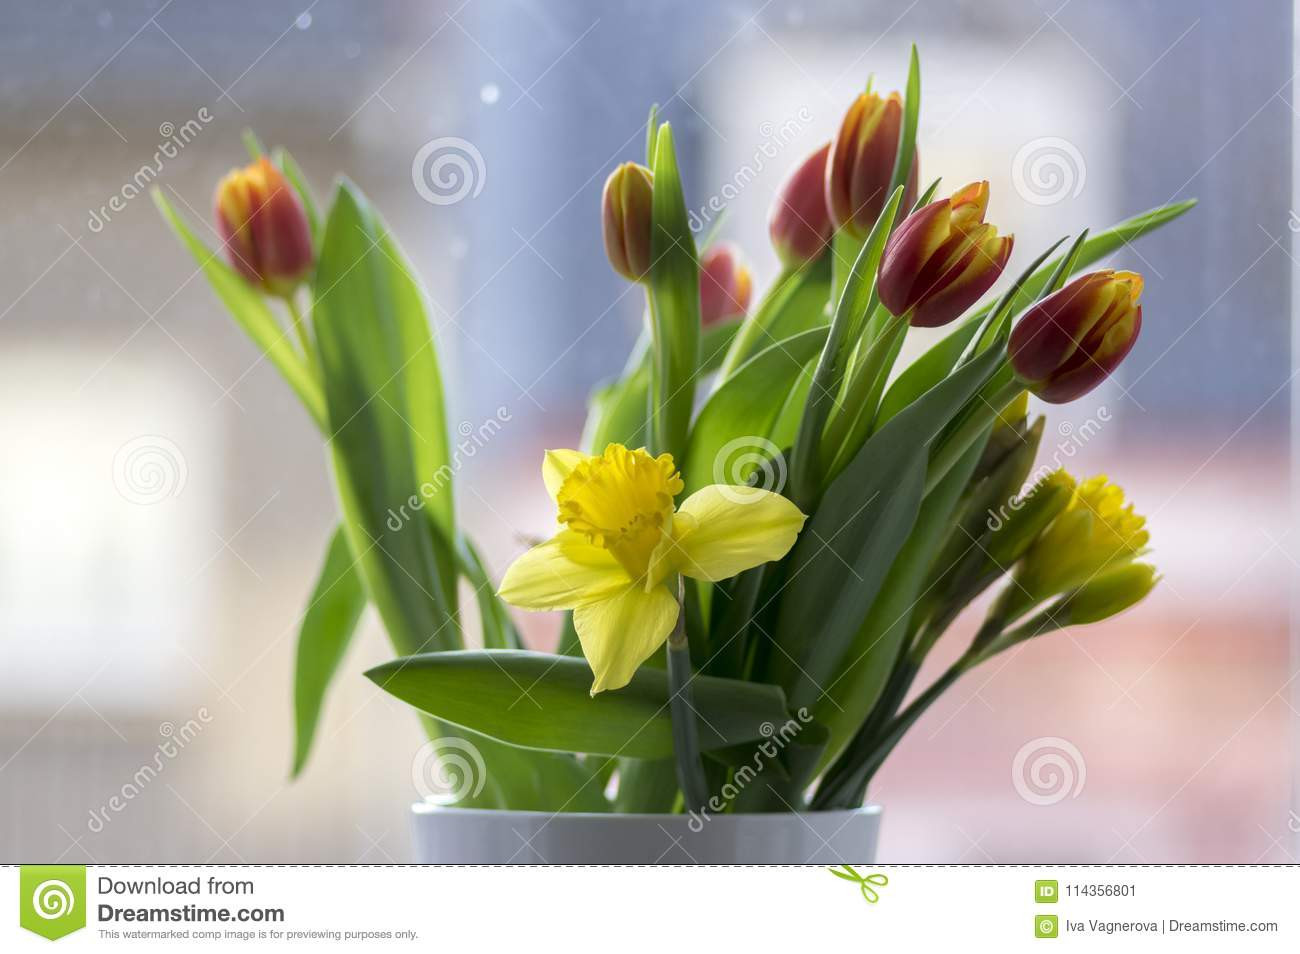 15 Stylish White Tulips In Glass Vase 2024 free download white tulips in glass vase of detail of tulips and daffodils bouquet ornamental spring flowers within detail of tulips and daffodils bouquet ornamental spring flowers yellow red flower heads